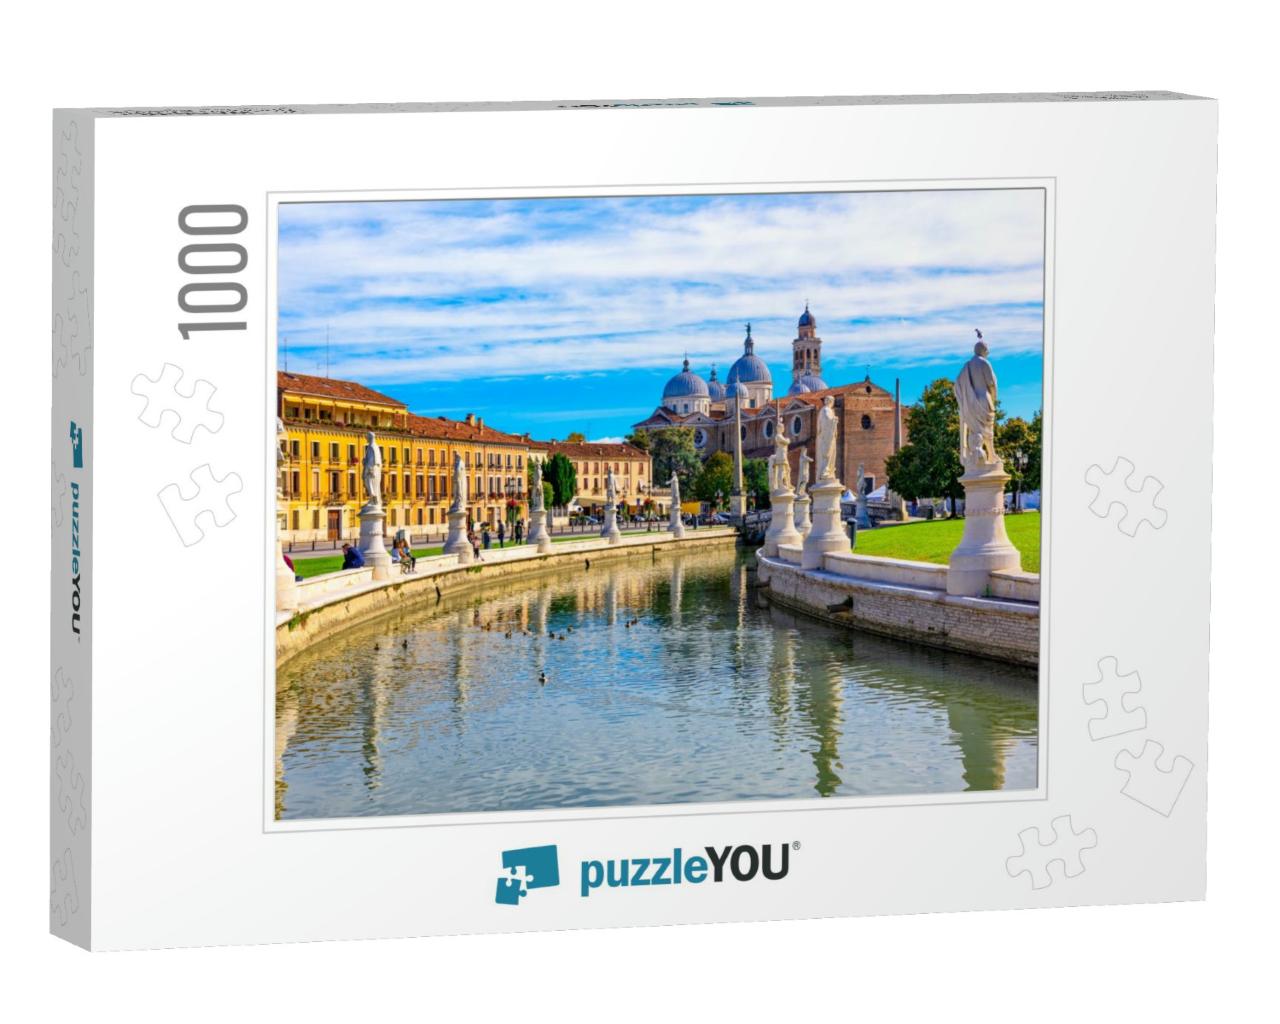 View of Canal with Statues on Square Prato Della Valle &... Jigsaw Puzzle with 1000 pieces